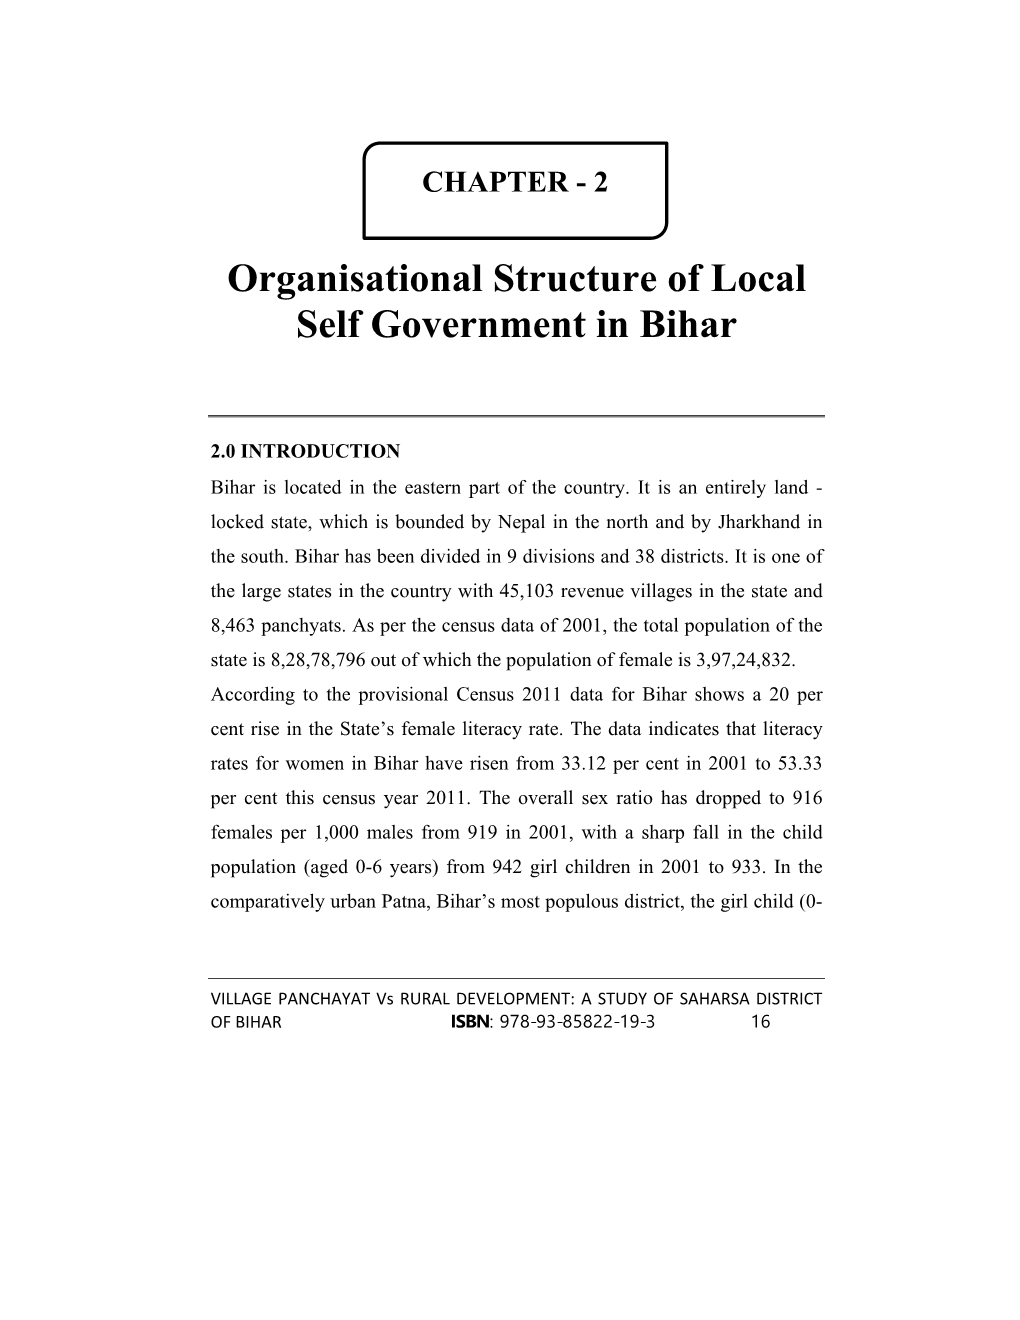 Organisational Structure of Local Self Government in Bihar